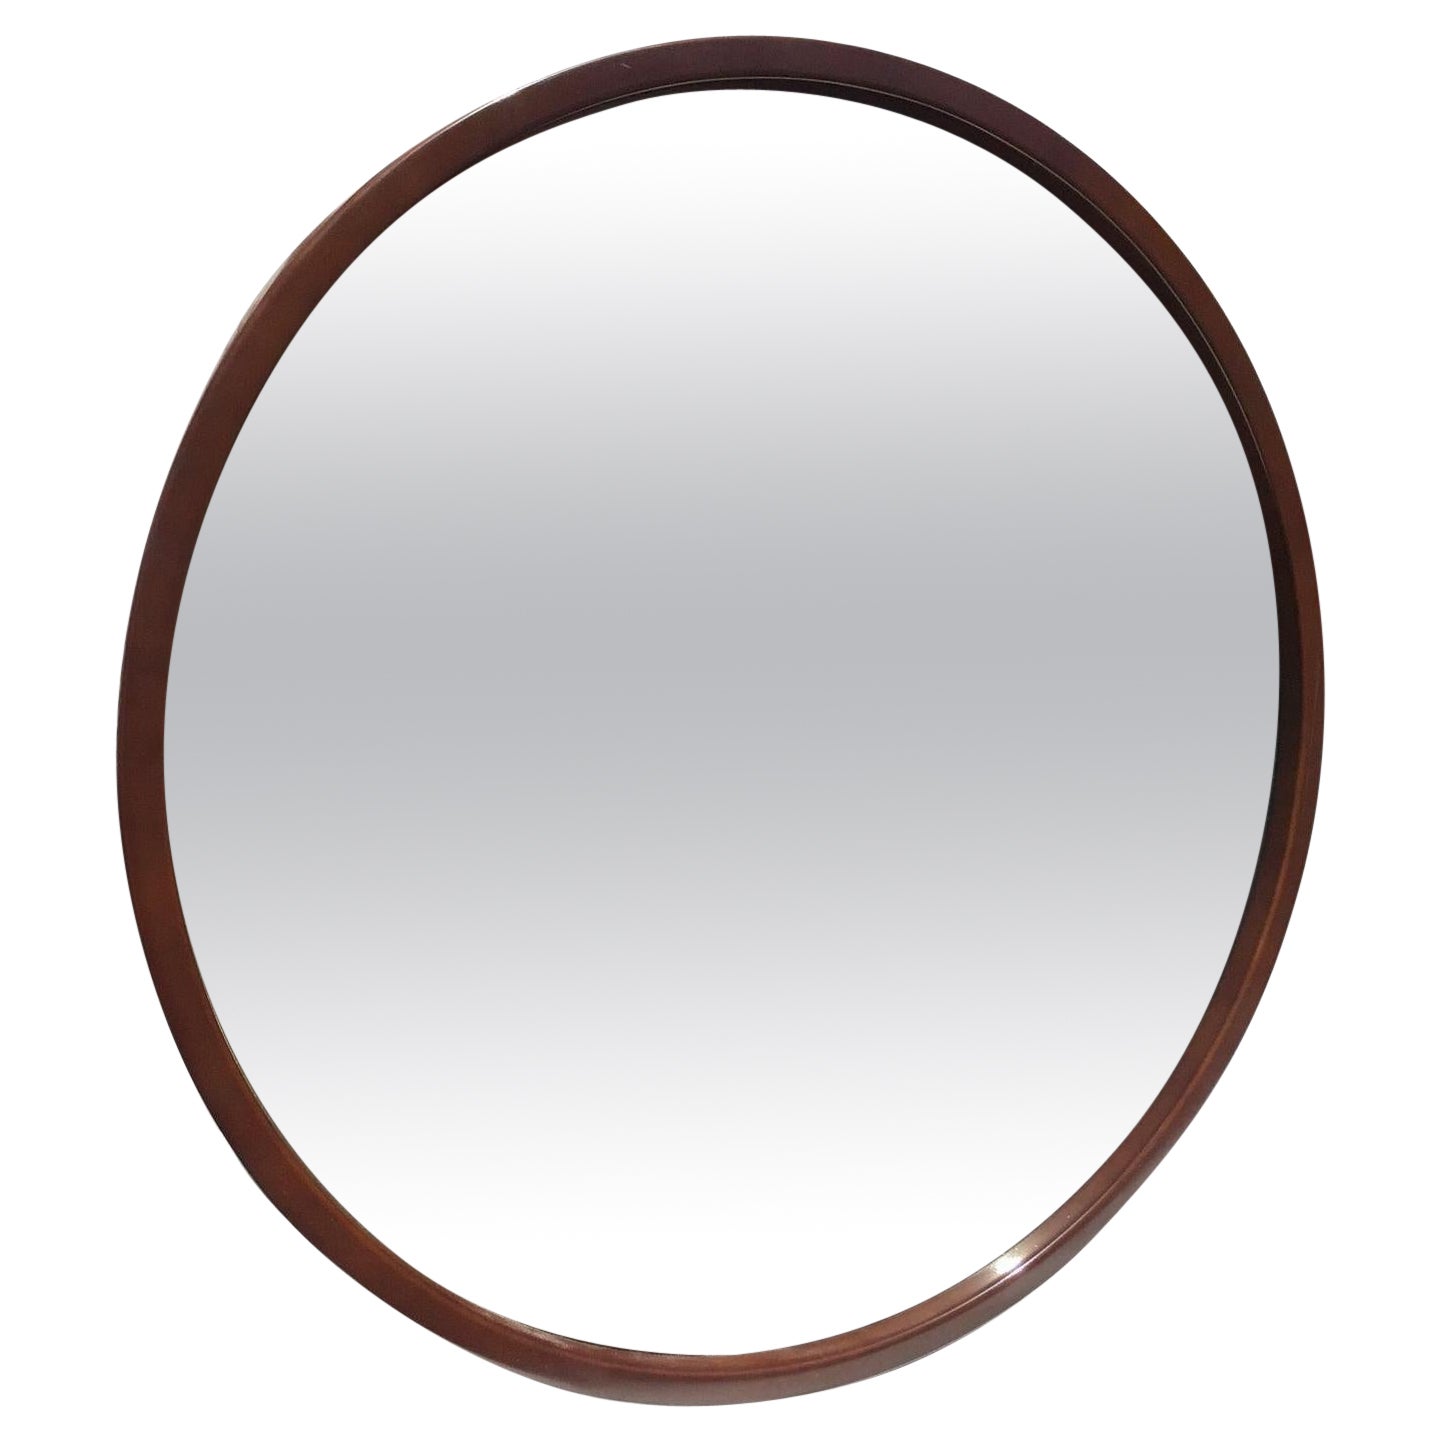 Modern Circular Mirror in Brown Lacquered Wood from the 70s. Danish School Style For Sale